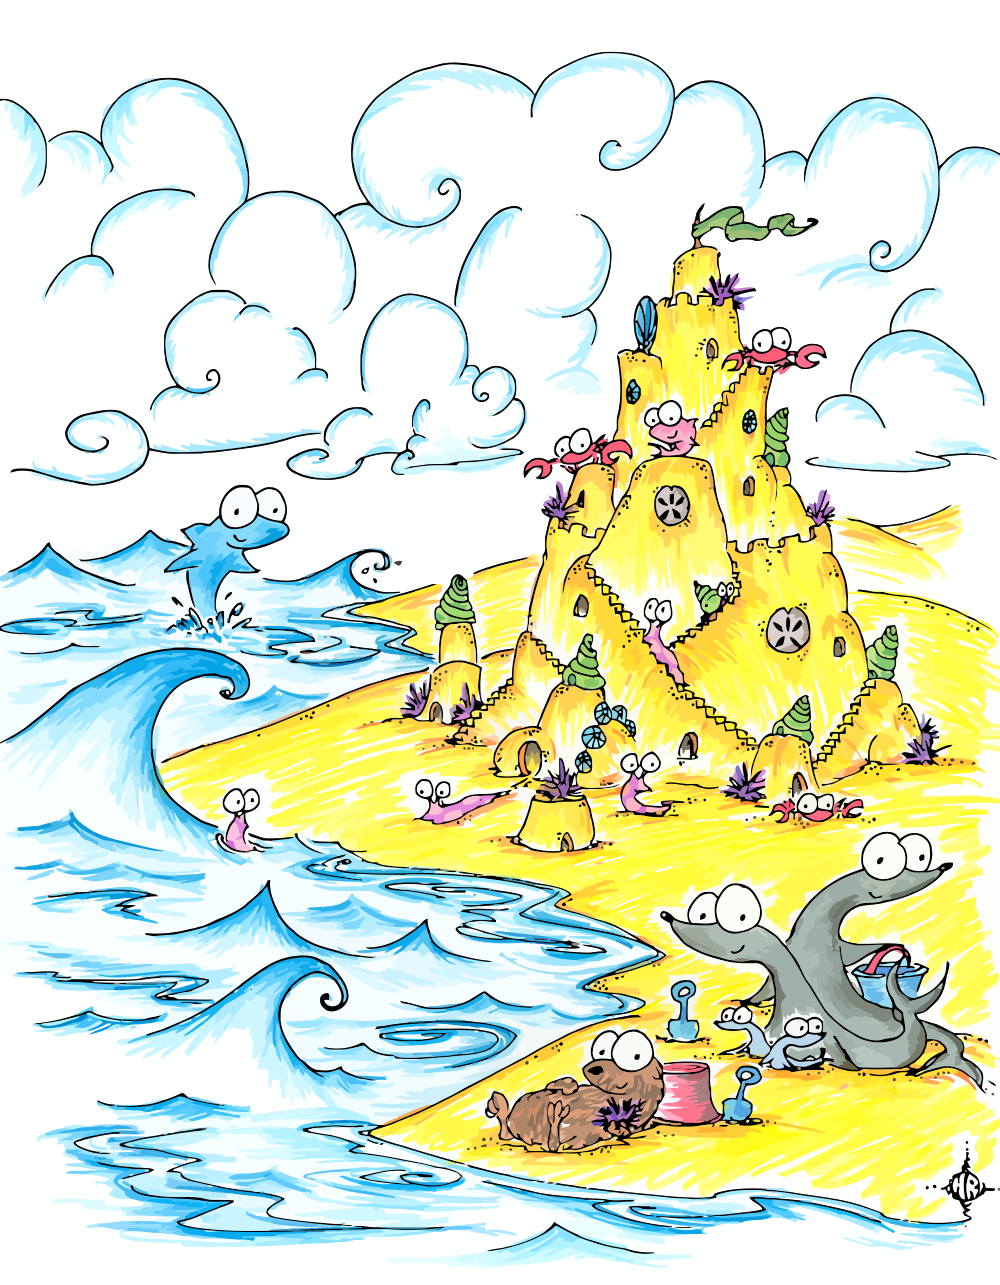 screen background: sea creatures building a sand castle by the sea ...